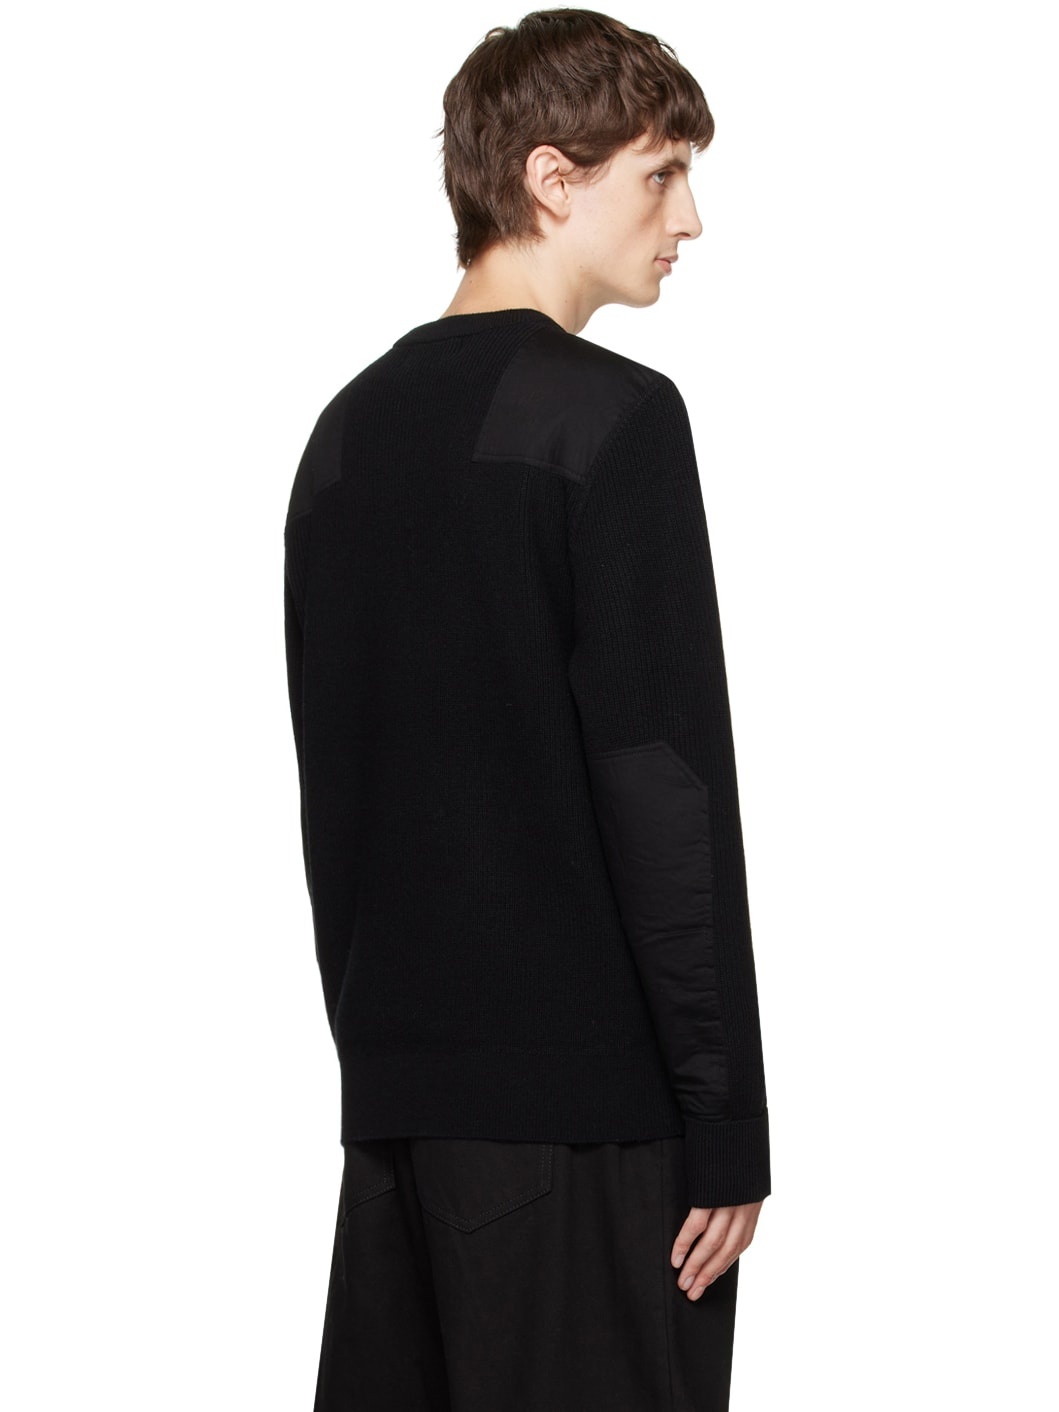 Black Fred Perry Edition Sweater - 3